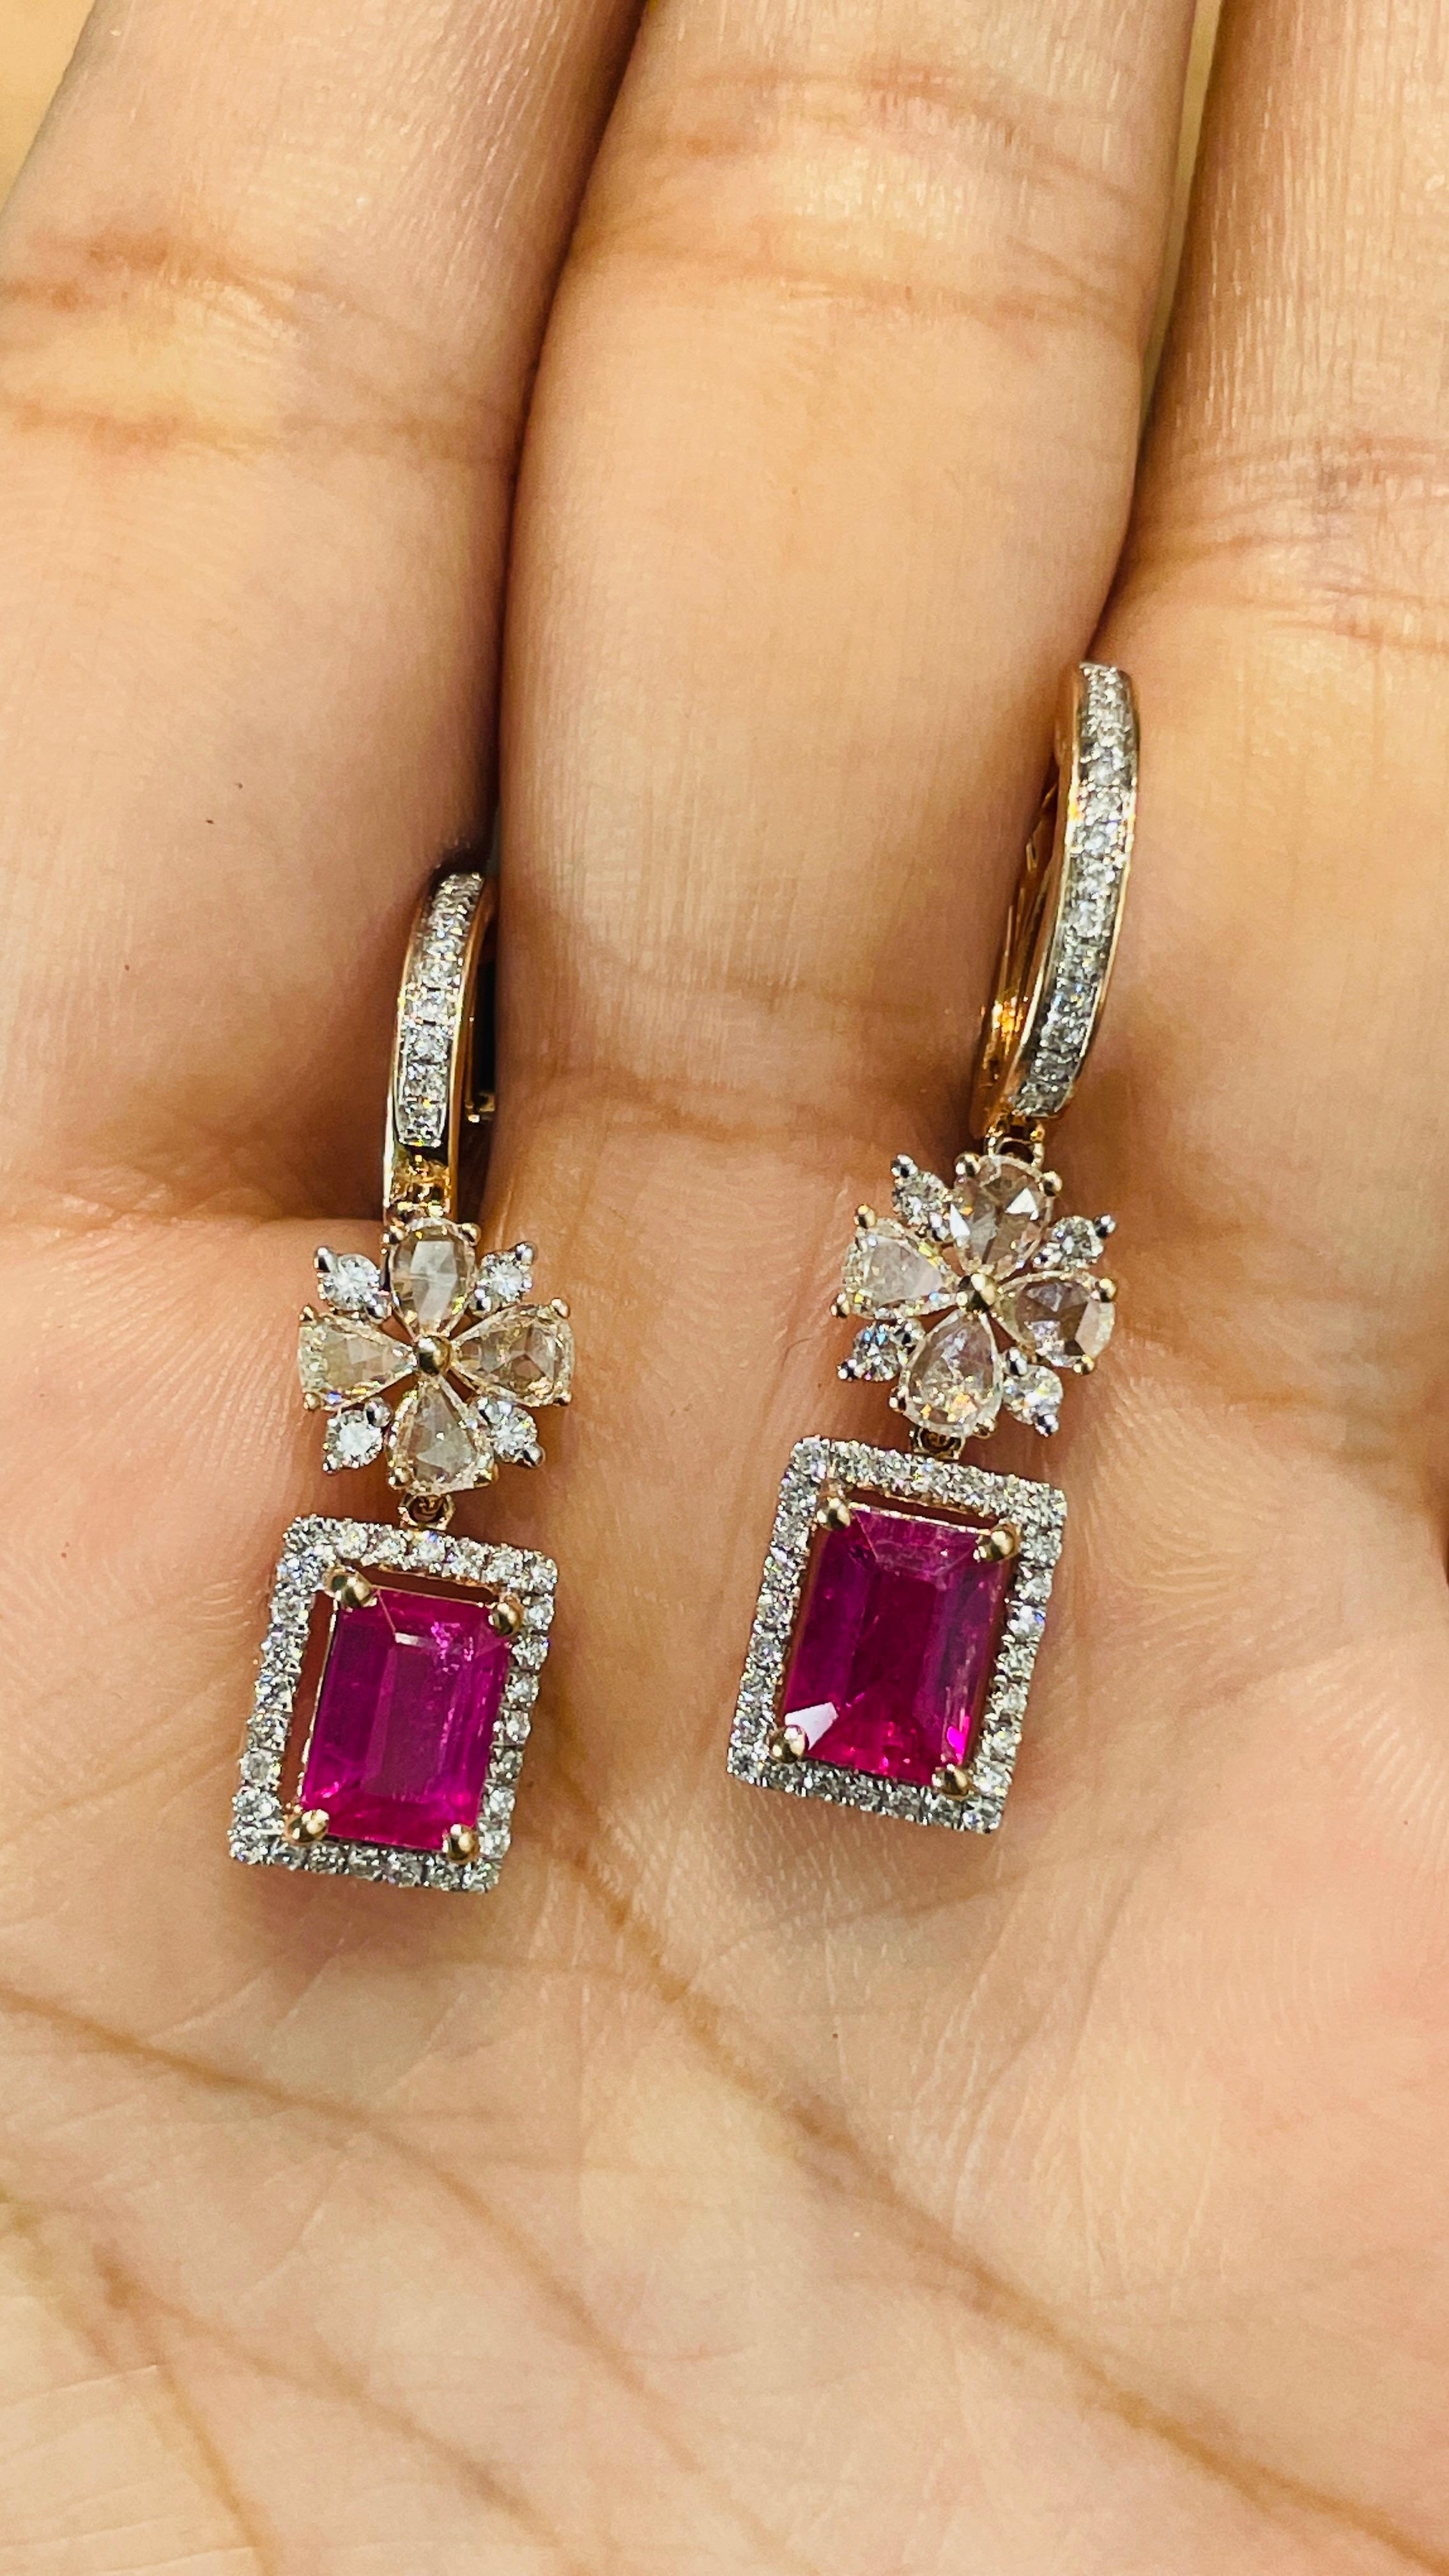 Ruby and Diamond Dangle earrings to make a statement with your look. These earrings create a sparkling, luxurious look featuring octagon cut gemstone.
If you love to gravitate towards unique styles, this piece of jewelry is perfect for you.

PRODUCT